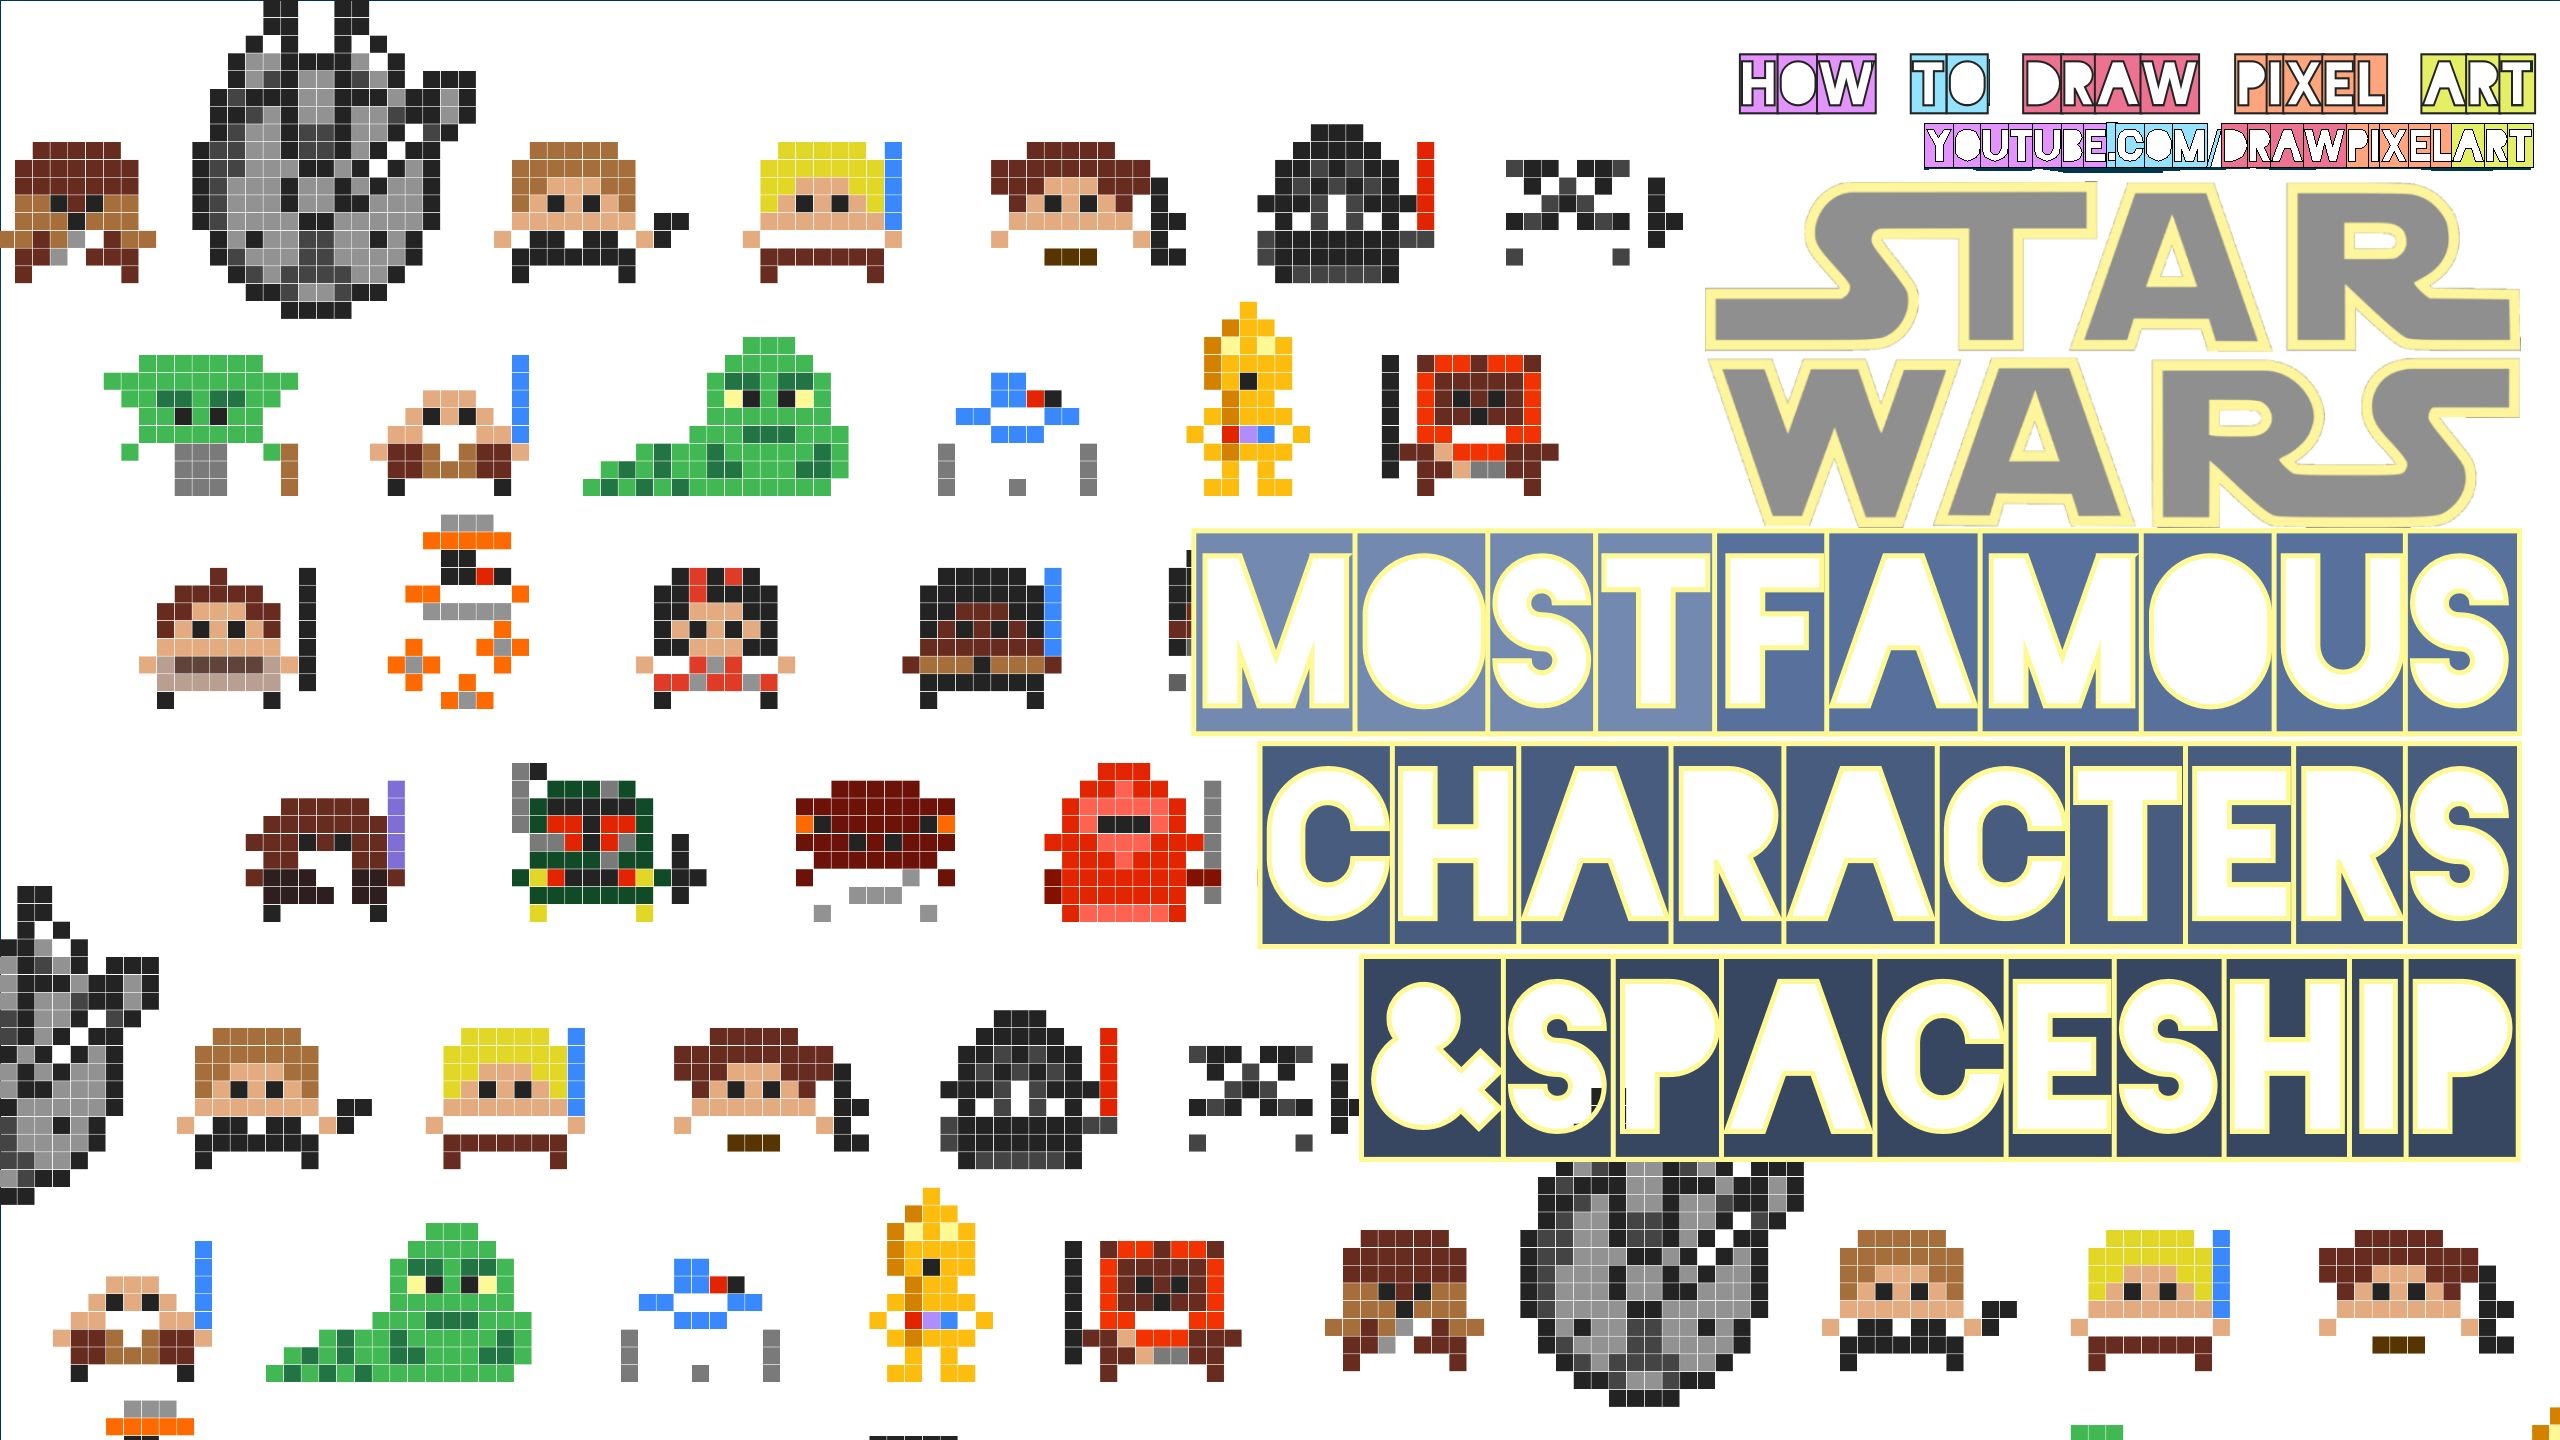 Top How To Draw All Star Wars Characters in the year 2023 The ultimate guide 